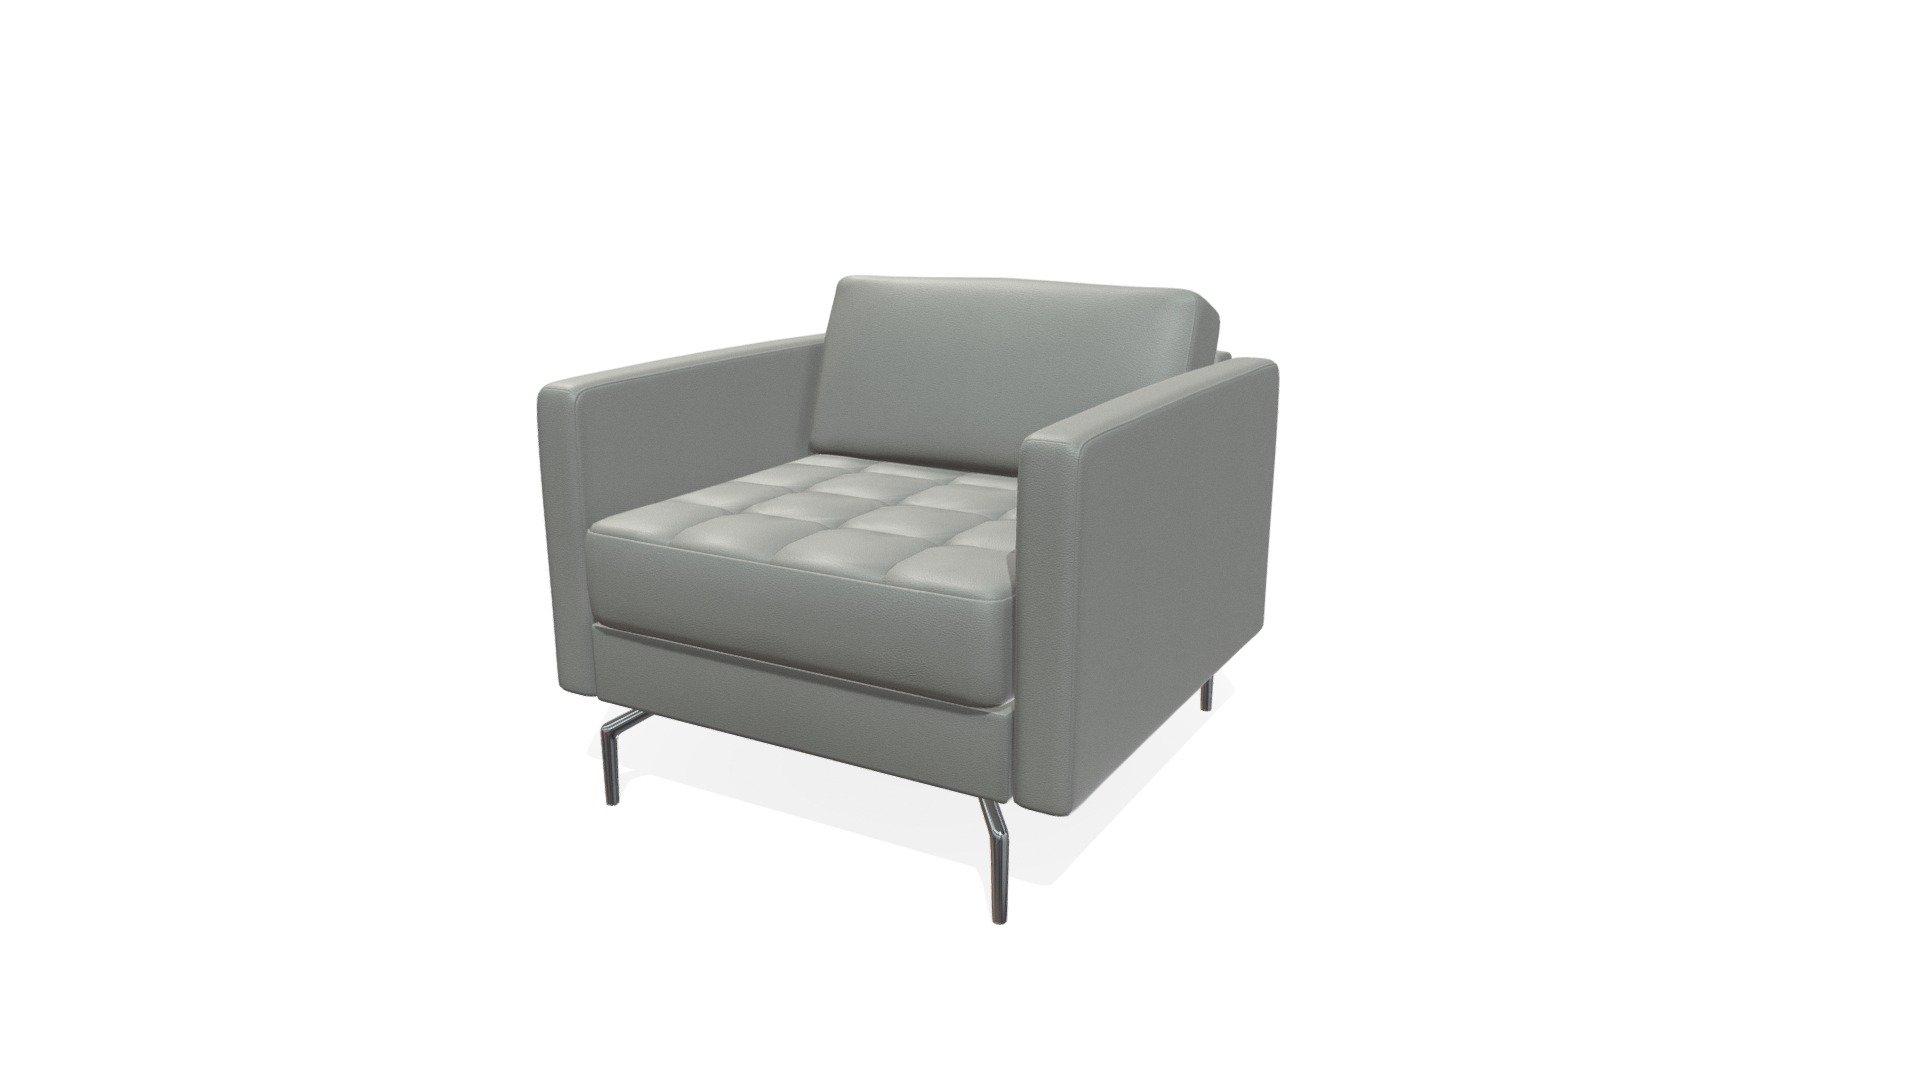 DIMENSIONS AND WEIGHT
Height: 77/45 cm
Width: 98 cm
Depth: 87½ cm
Seating height: 45 cm
Armrest height: 65 cm
Maximum weight load: 125 kg

MATERIALS
Composition: 64% polyester, 36% viscose
Leg: solid oak
Armrest: Top: 30kg/m3 PUR foam. Inside: 30 kg/m3 PUR foam. Outside: 16 kg/m3 PUR foam.
Back: 16 kg/m3 polyurethane foam, 30 kg/m3 polyurethane foam
Back cushion: 23 kg/m3 hyper soft foam, wadding
Frame: Solid pine, particleboard, plywood, hardboard
Seat: Tufted: 35 kg/m3 HR + 30 kg/m3 HR foam / wadding Plain: 35 kg/m3 HR / foam/feather mix / wadding
Suspension: Nozag springs
Fabric lining: Non-woven fabric (120g/m2), non-woven fabric (80g/m2), treton cotton fabric, jacquard fabric

FINISH
Leg: lacquered

DESIGNER
Anders Nørgaard - ARMCHAIR - OSAKA - Buy Royalty Free 3D model by Furniture (@hung.t33) 3d model